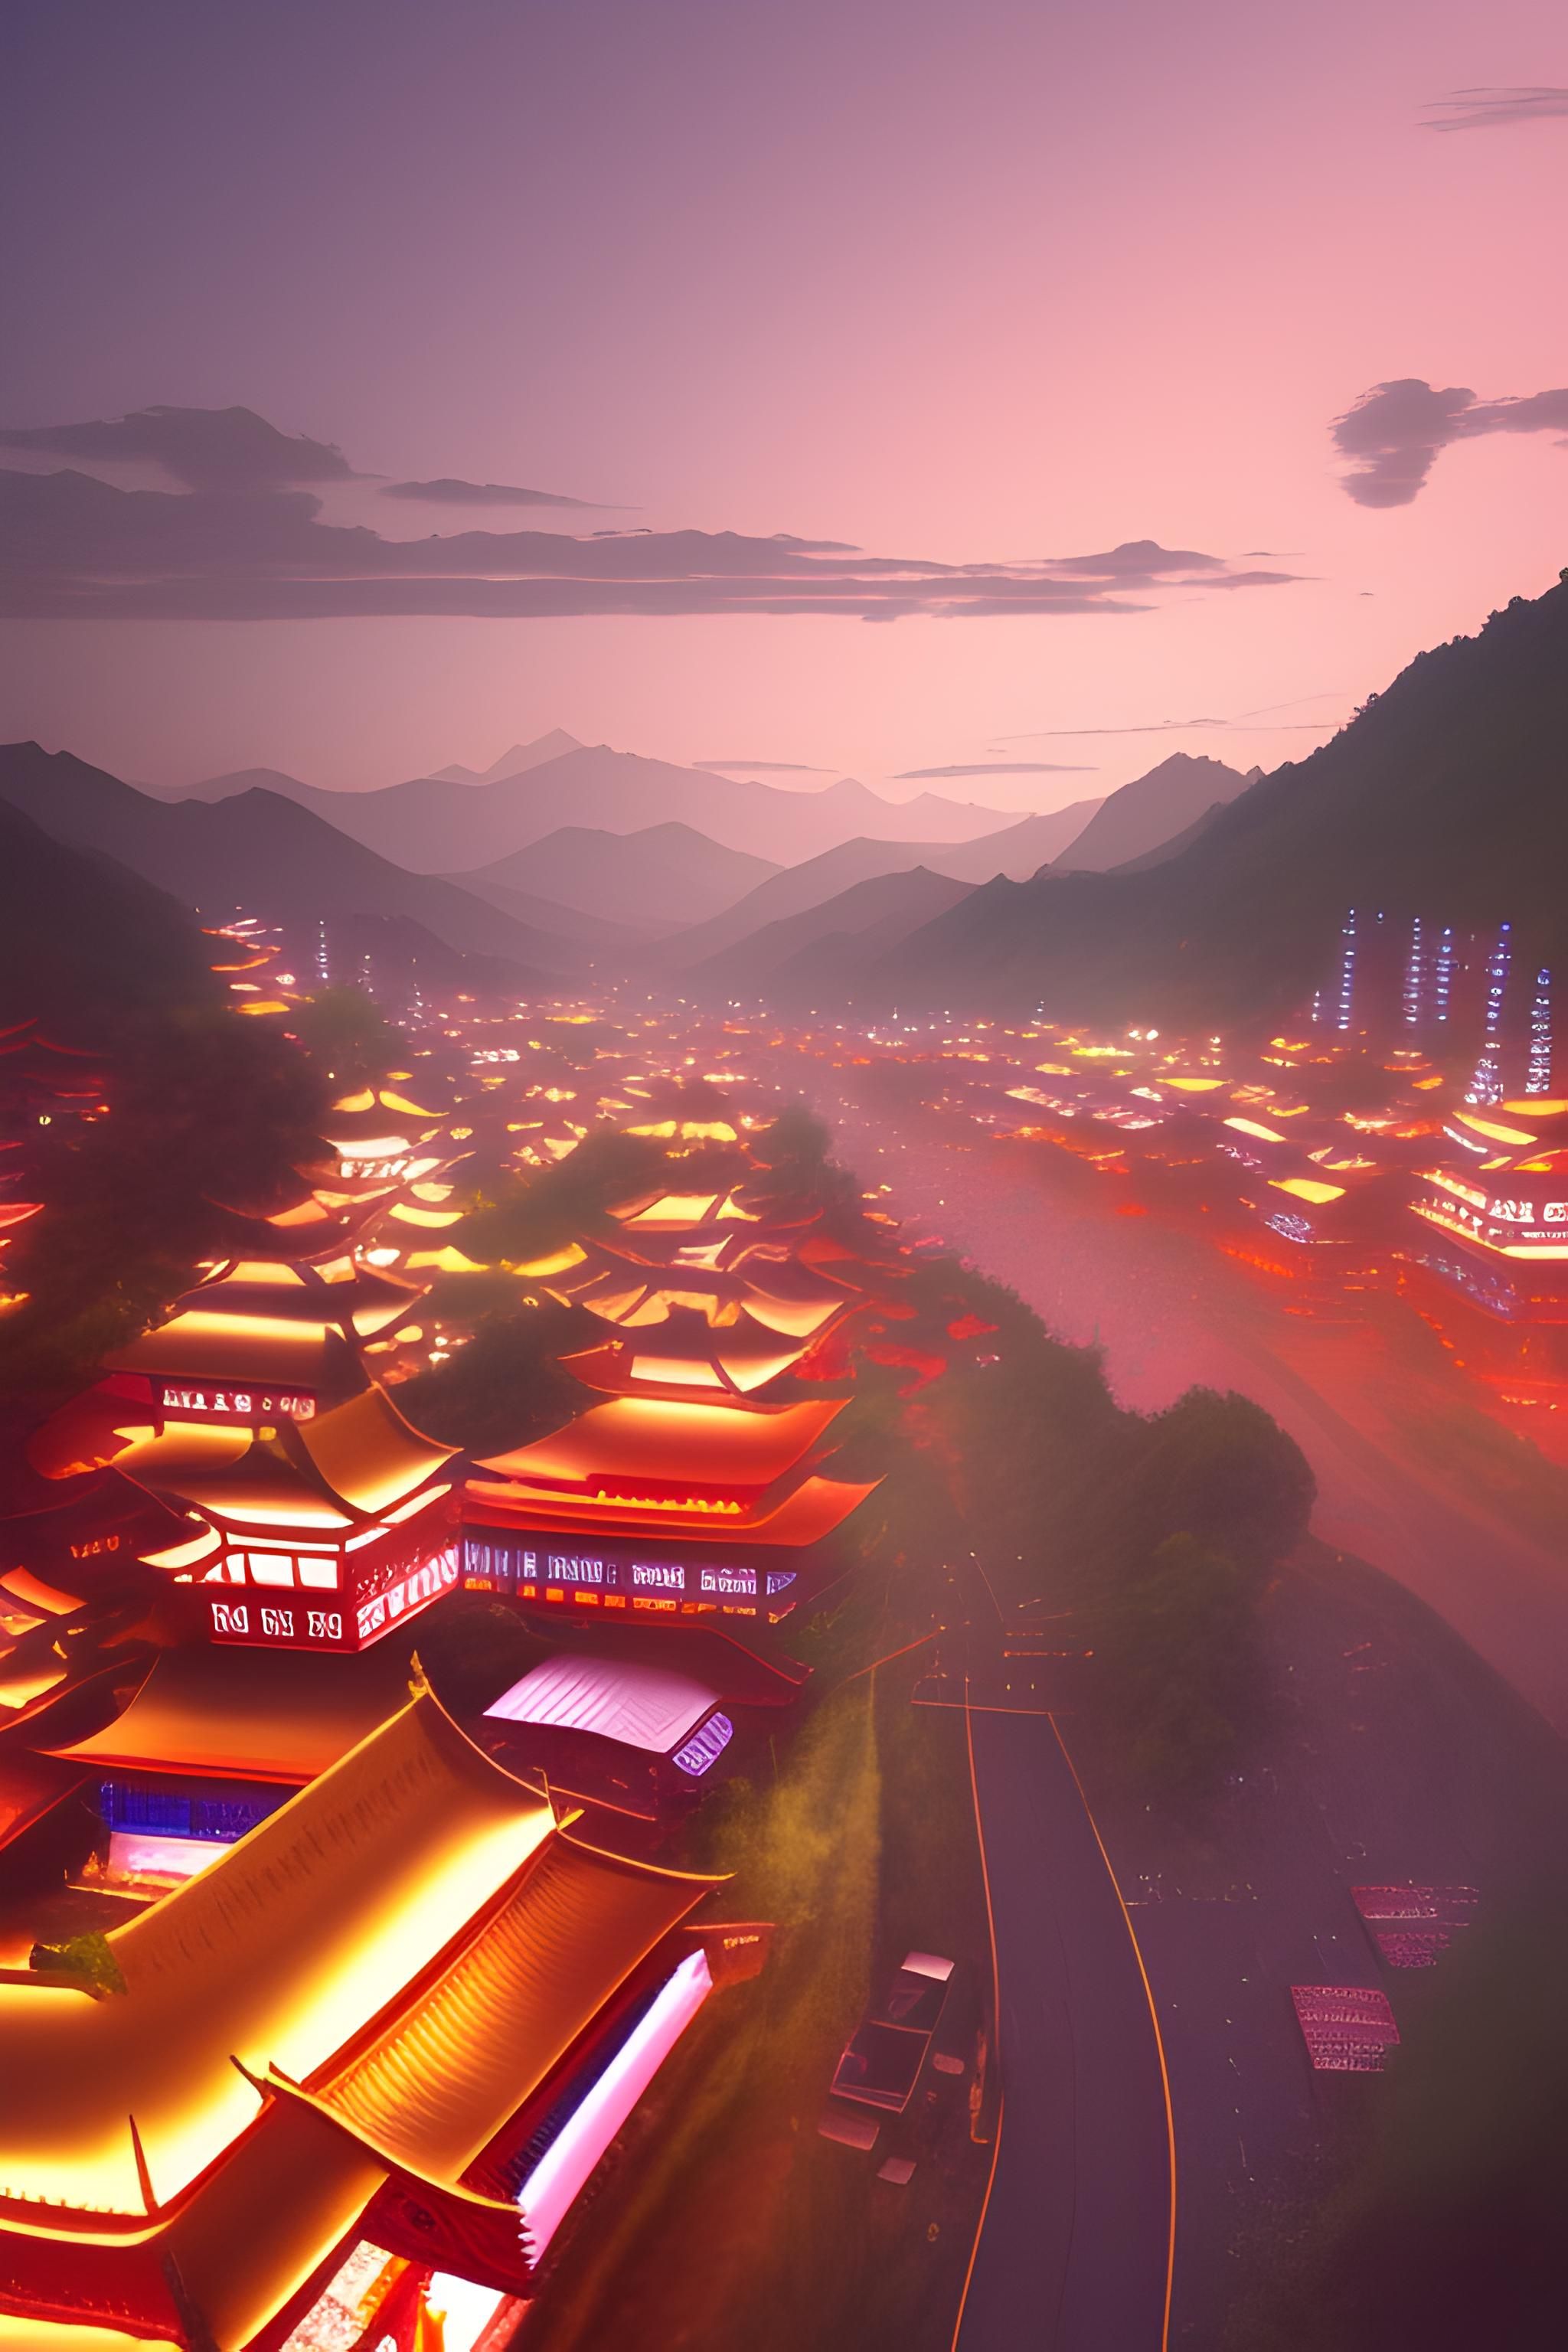  China Hintergrundbild 2048x3072. A high resolution, stunning photo of a small town in China at night with some market